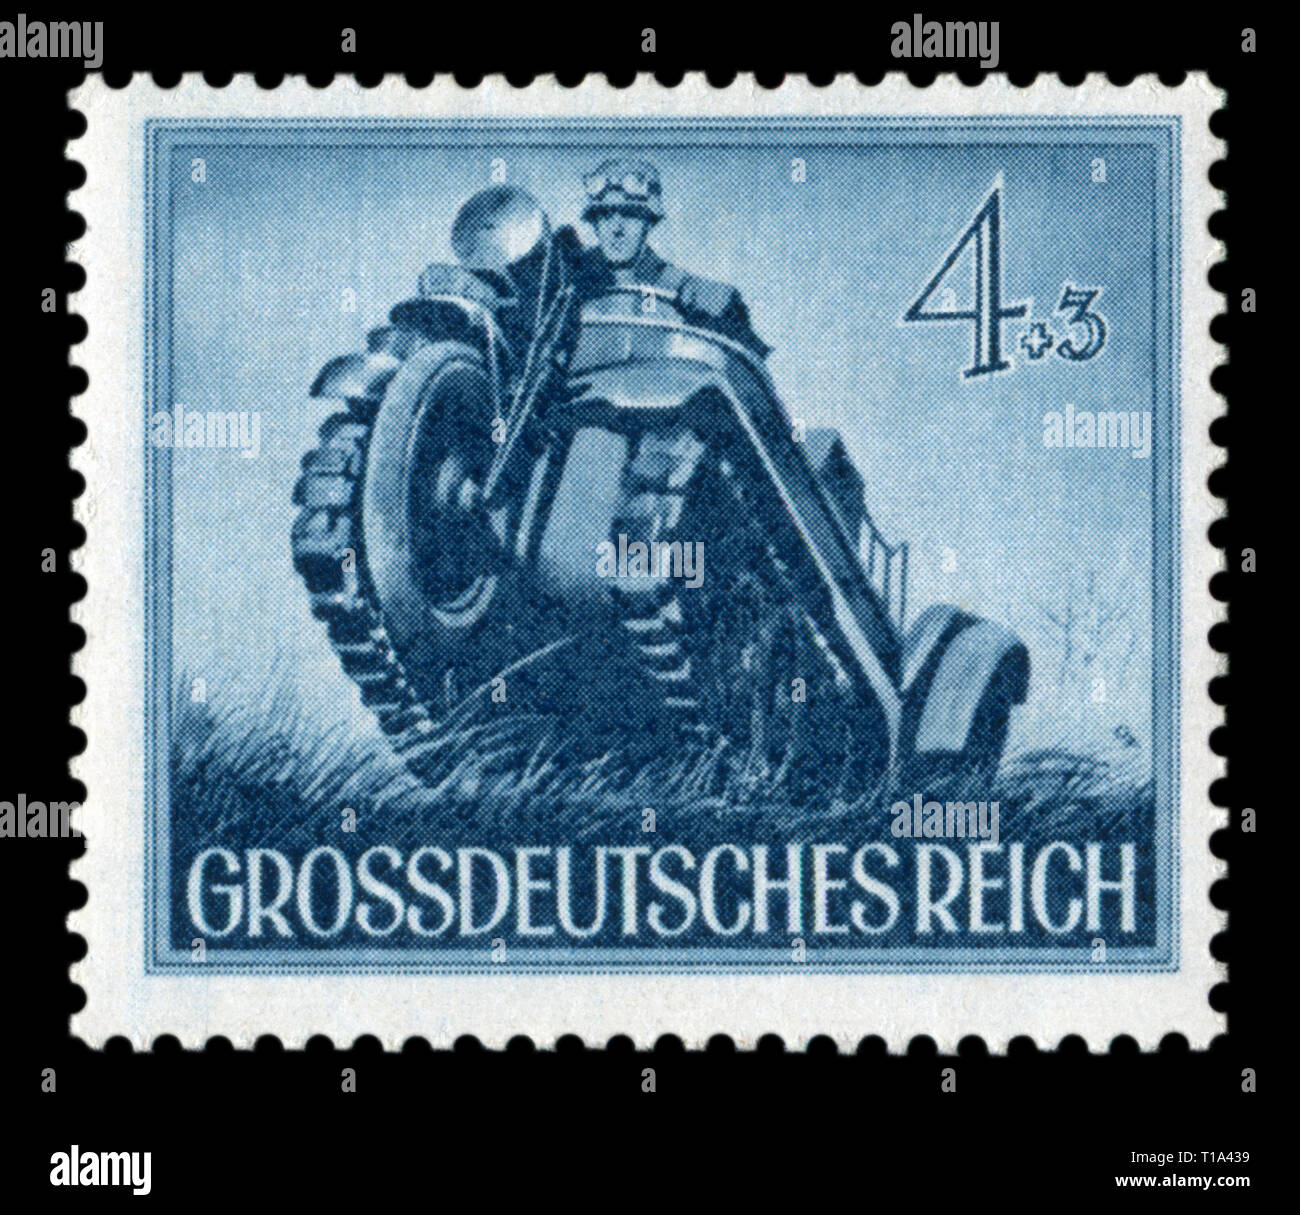 German historical stamp: Half-track motorcycle kettenkrad (SdKfz 2).The Army Of The third Reich. Day of commemoration of the fallen soldiers, 1944 Stock Photo